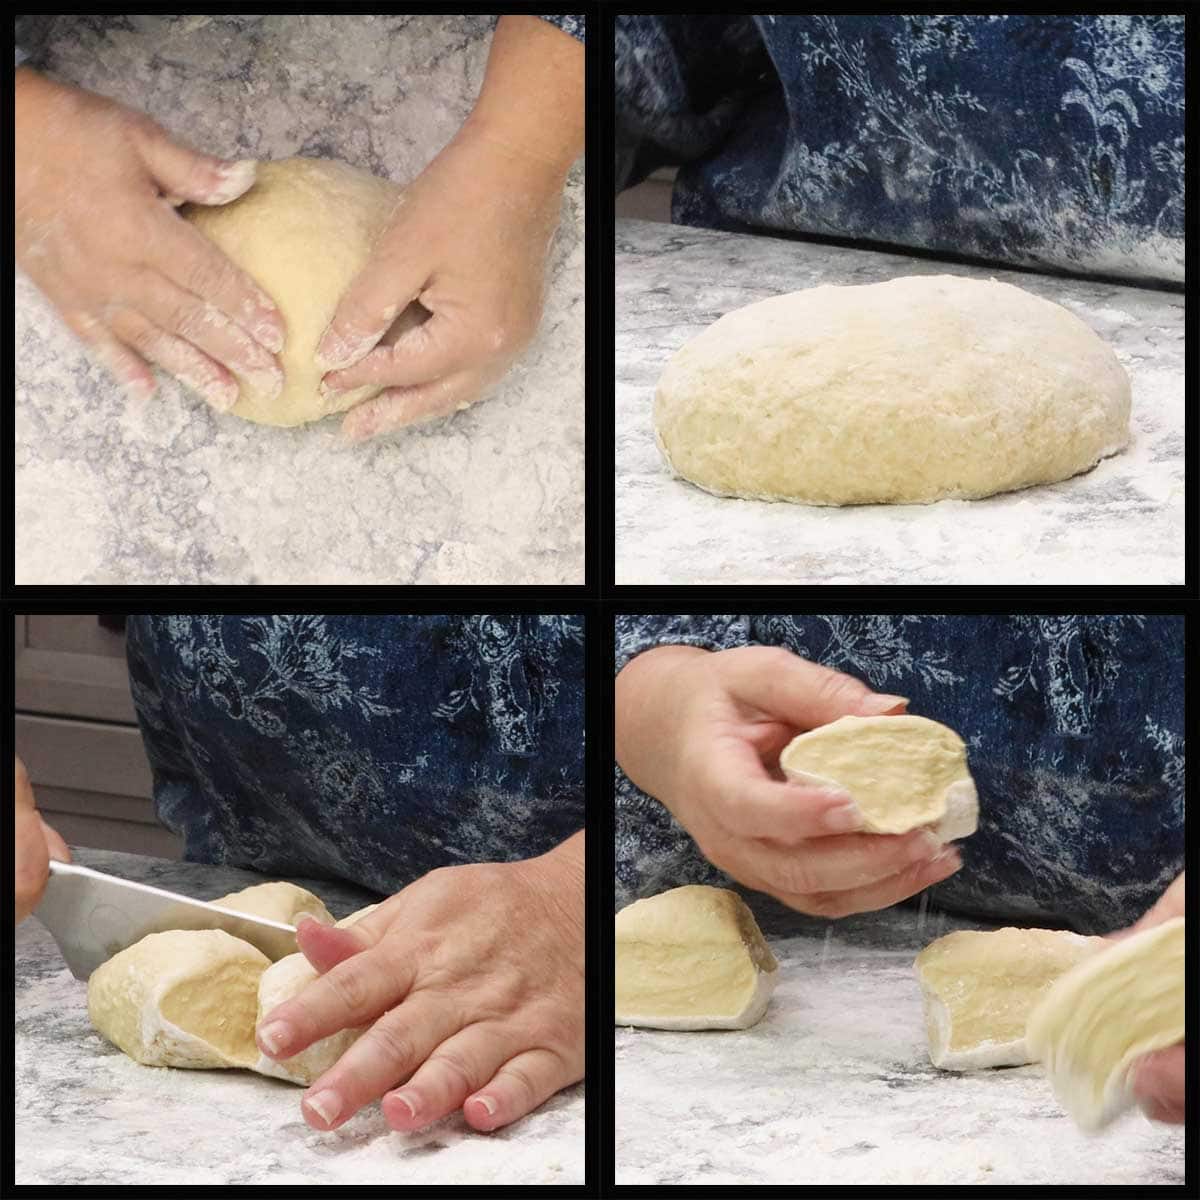 Finished dough ball being cut into quarters.